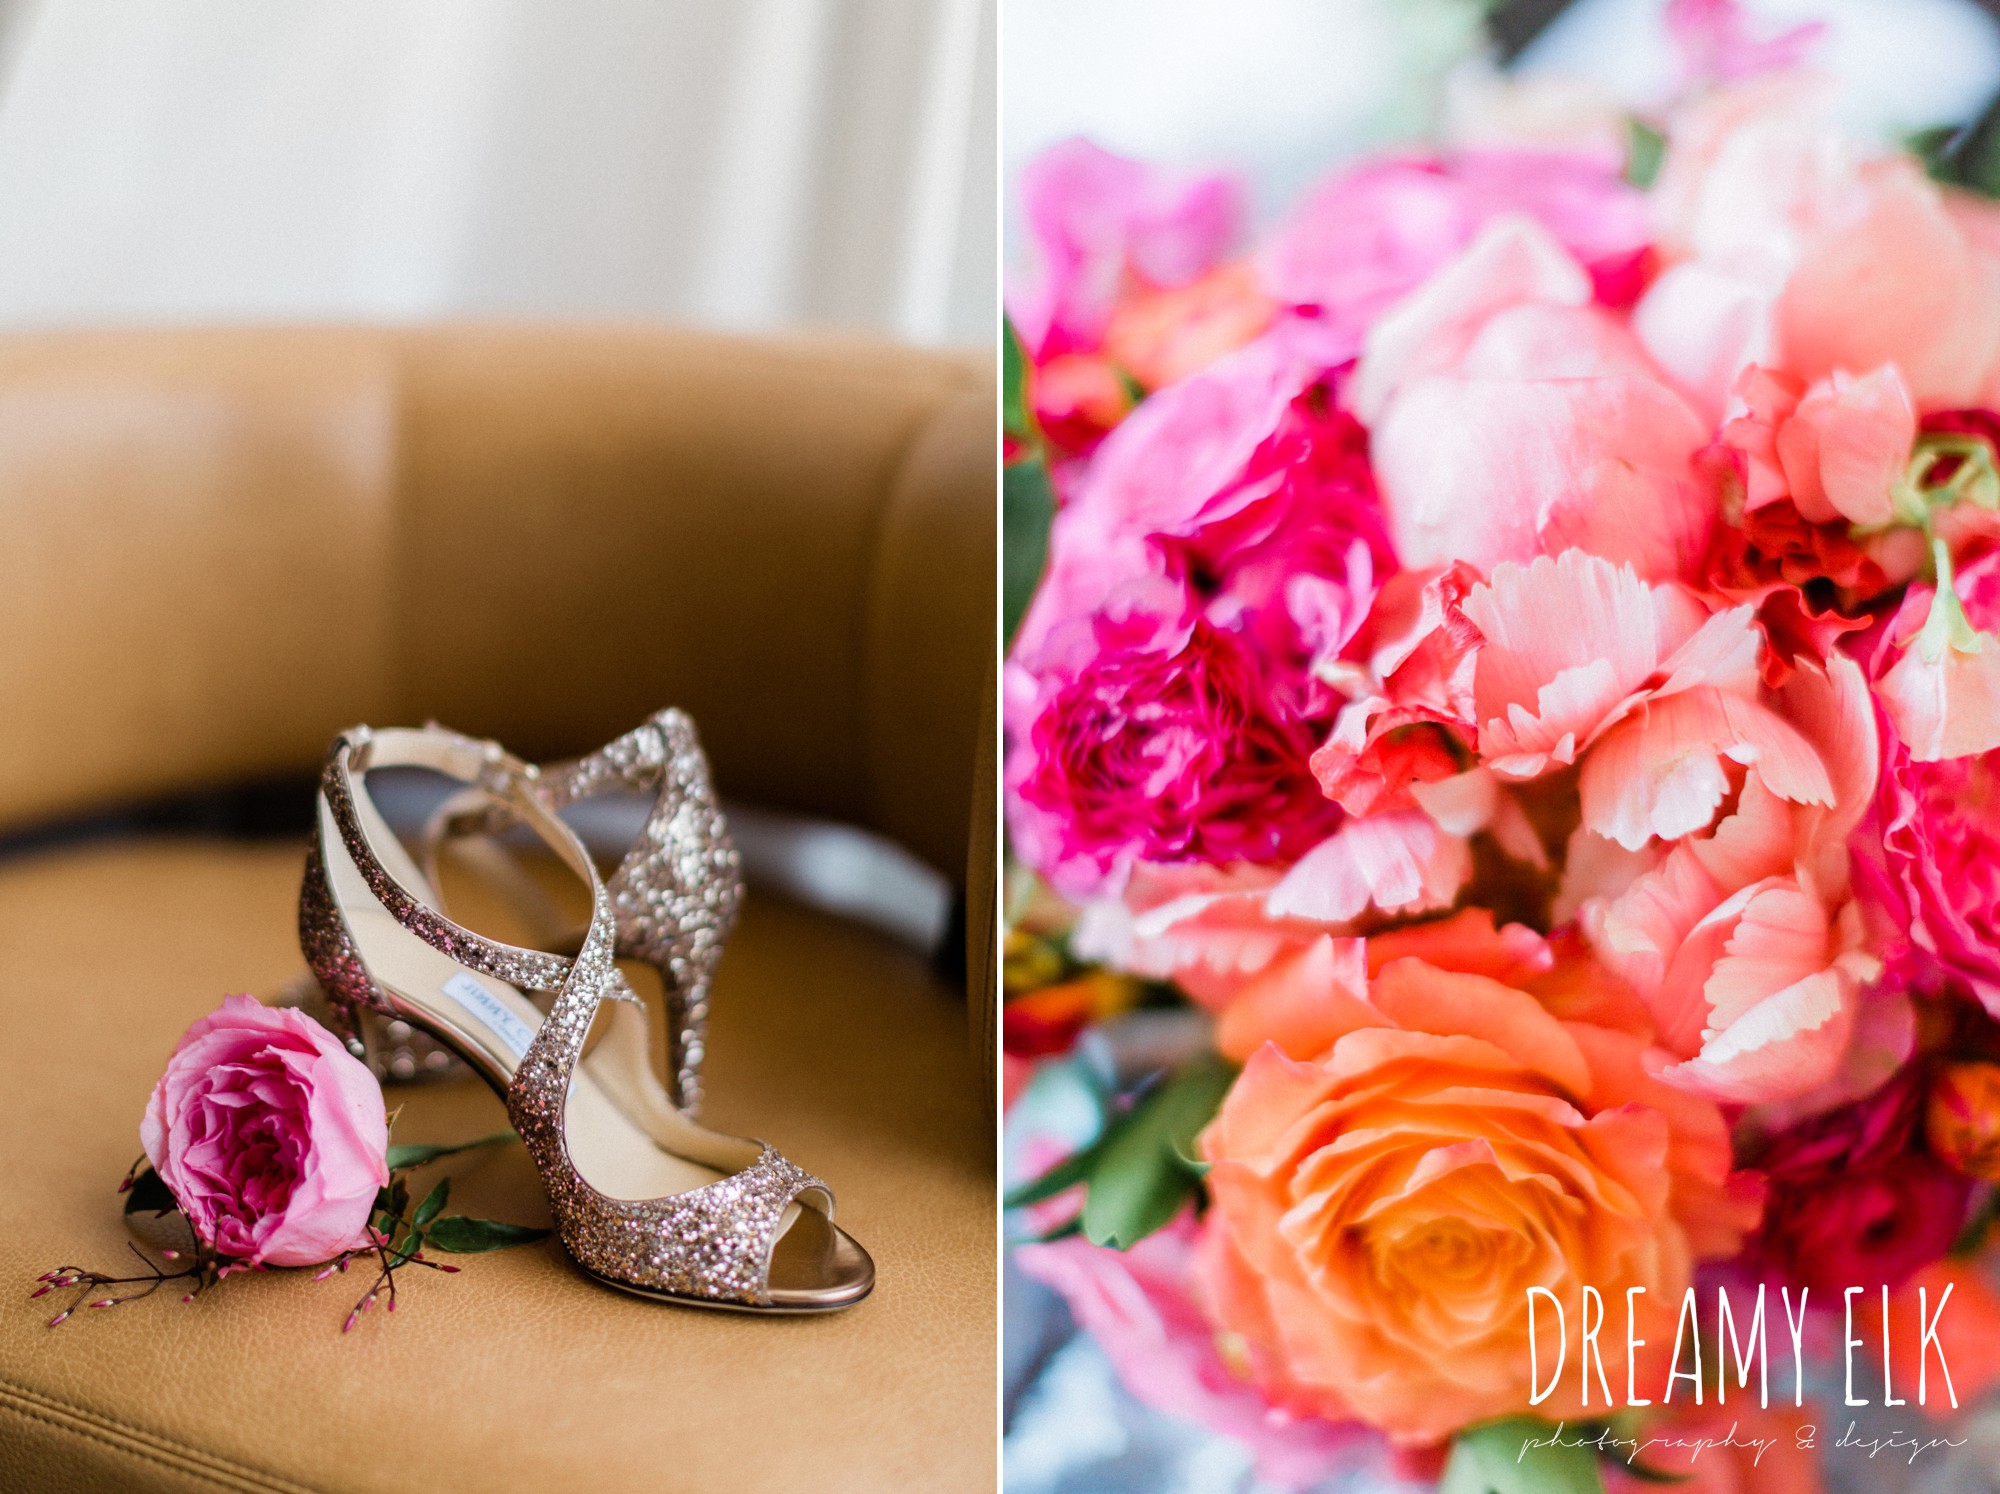 jimmy choo wedding shoes, spring colorful wedding photo, 809 at vickery, fort worth, texas, dreamy elk photography and design, jen rios weddings, kate foley designs